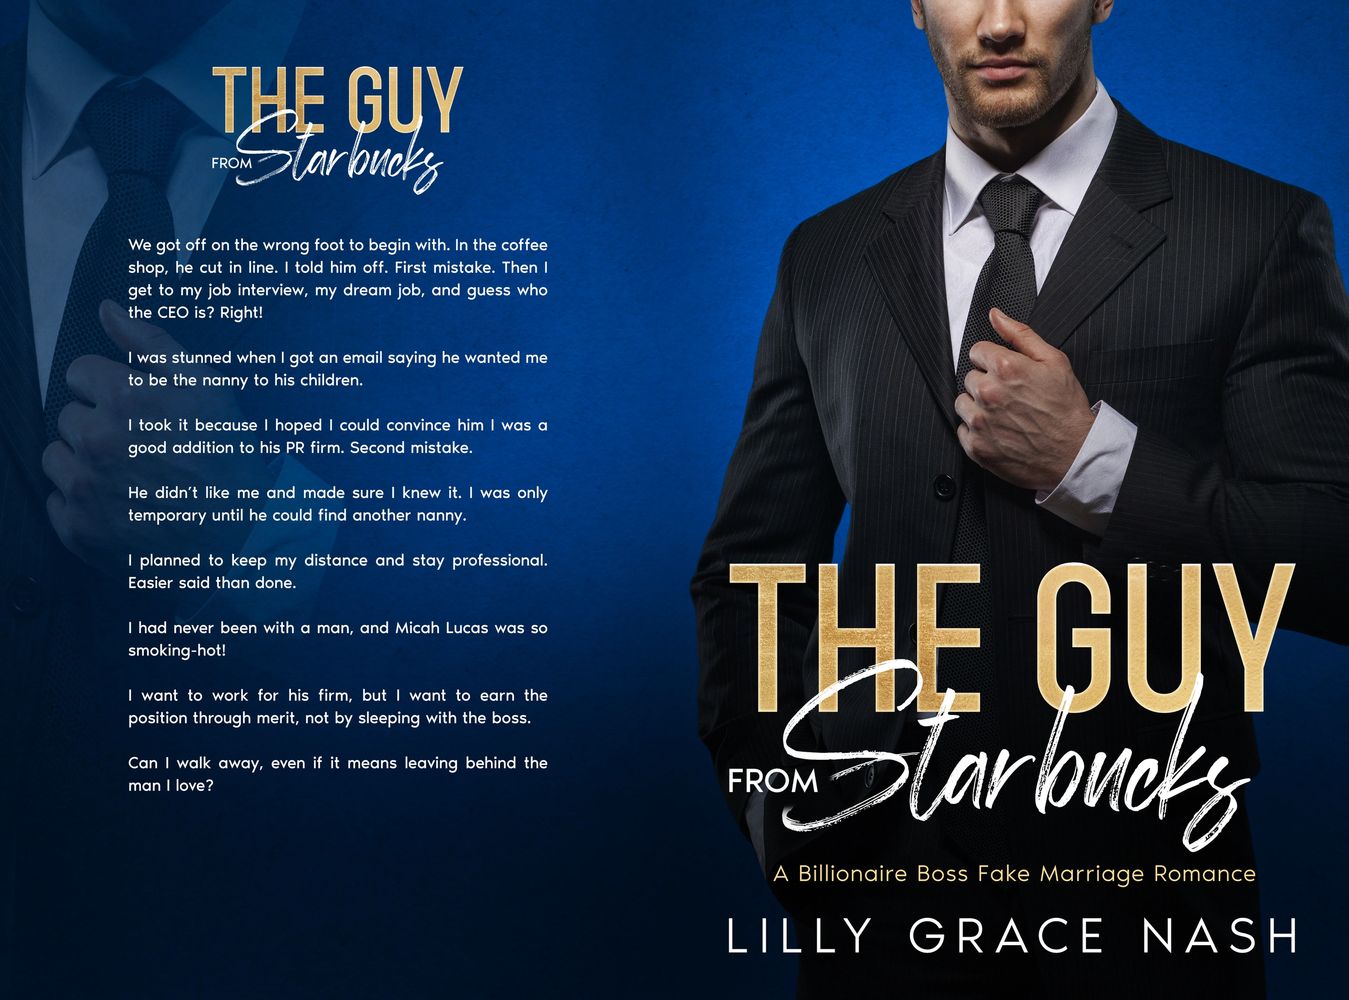 The Guy from Starbucks by Lilly Grace Nash available on Amazon